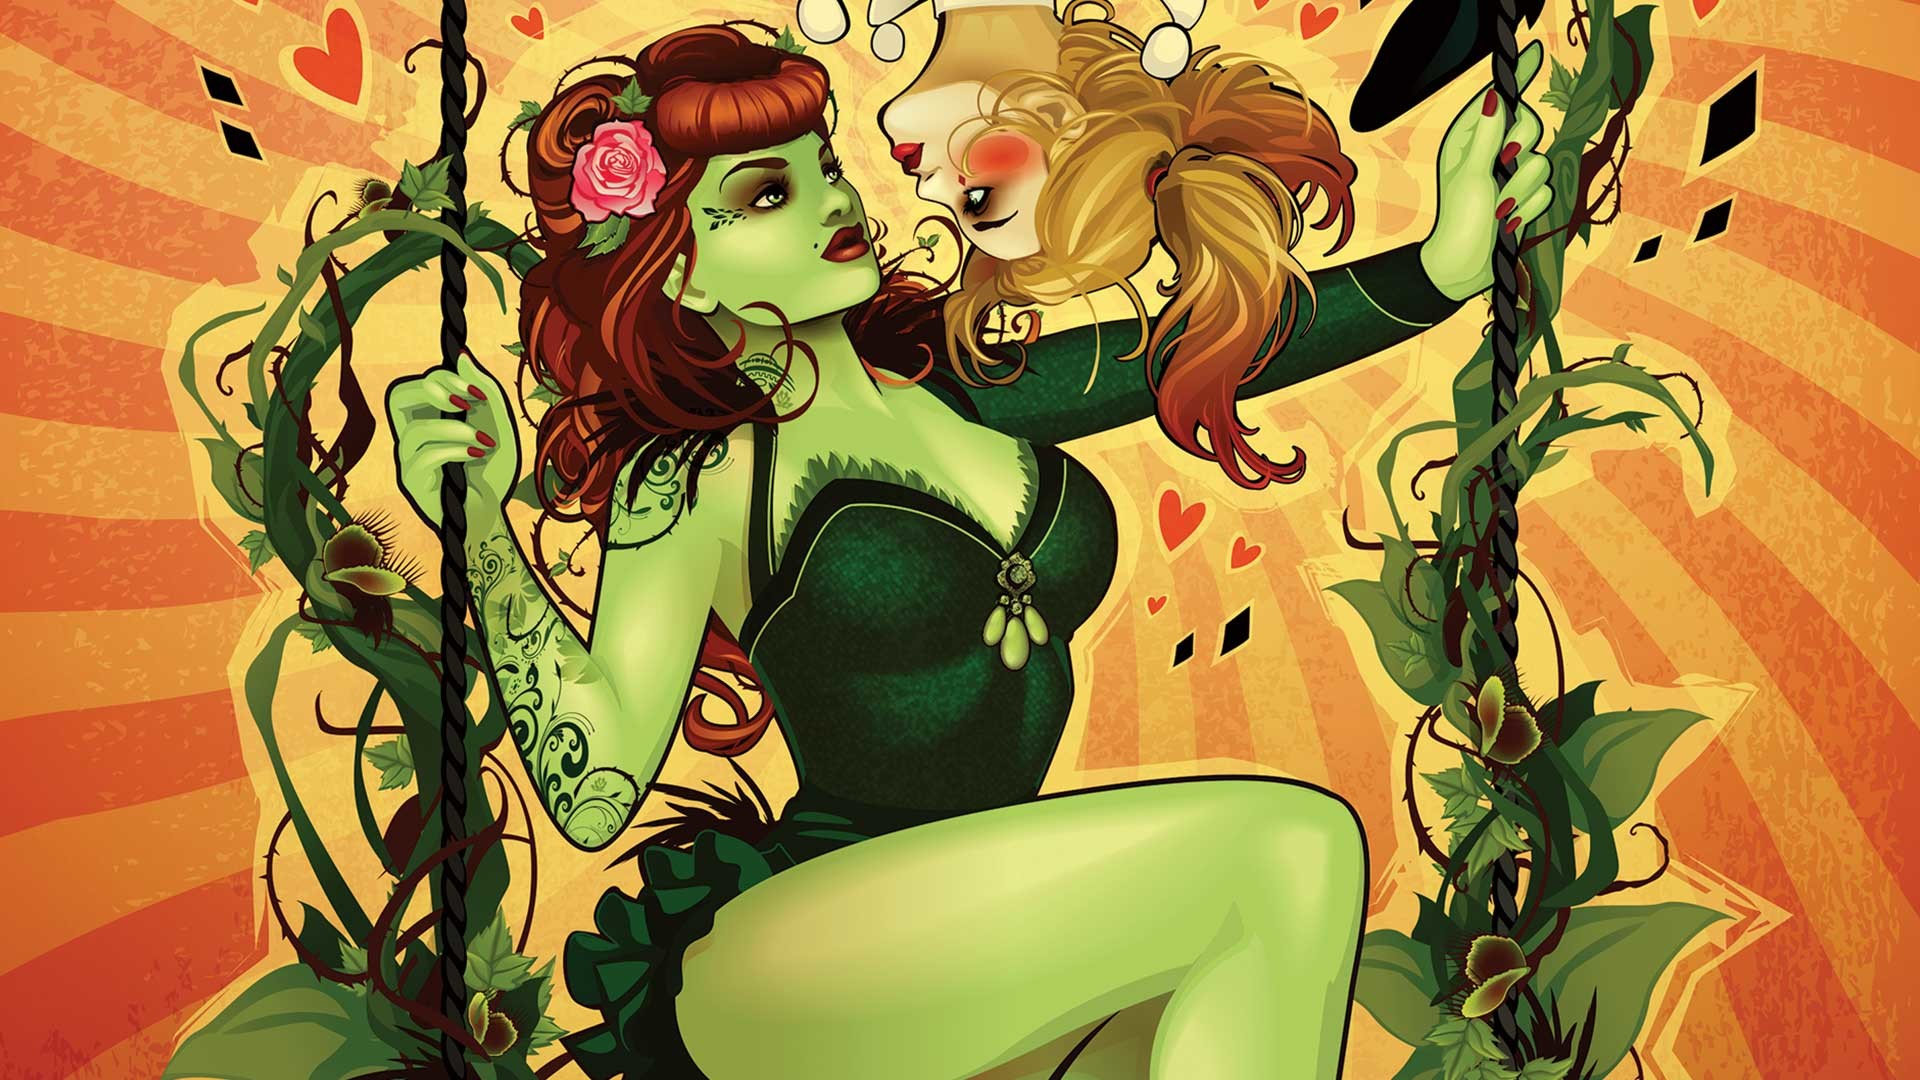 DC COMICS: BOMBSHELLS #27 cover by Ant Lucia